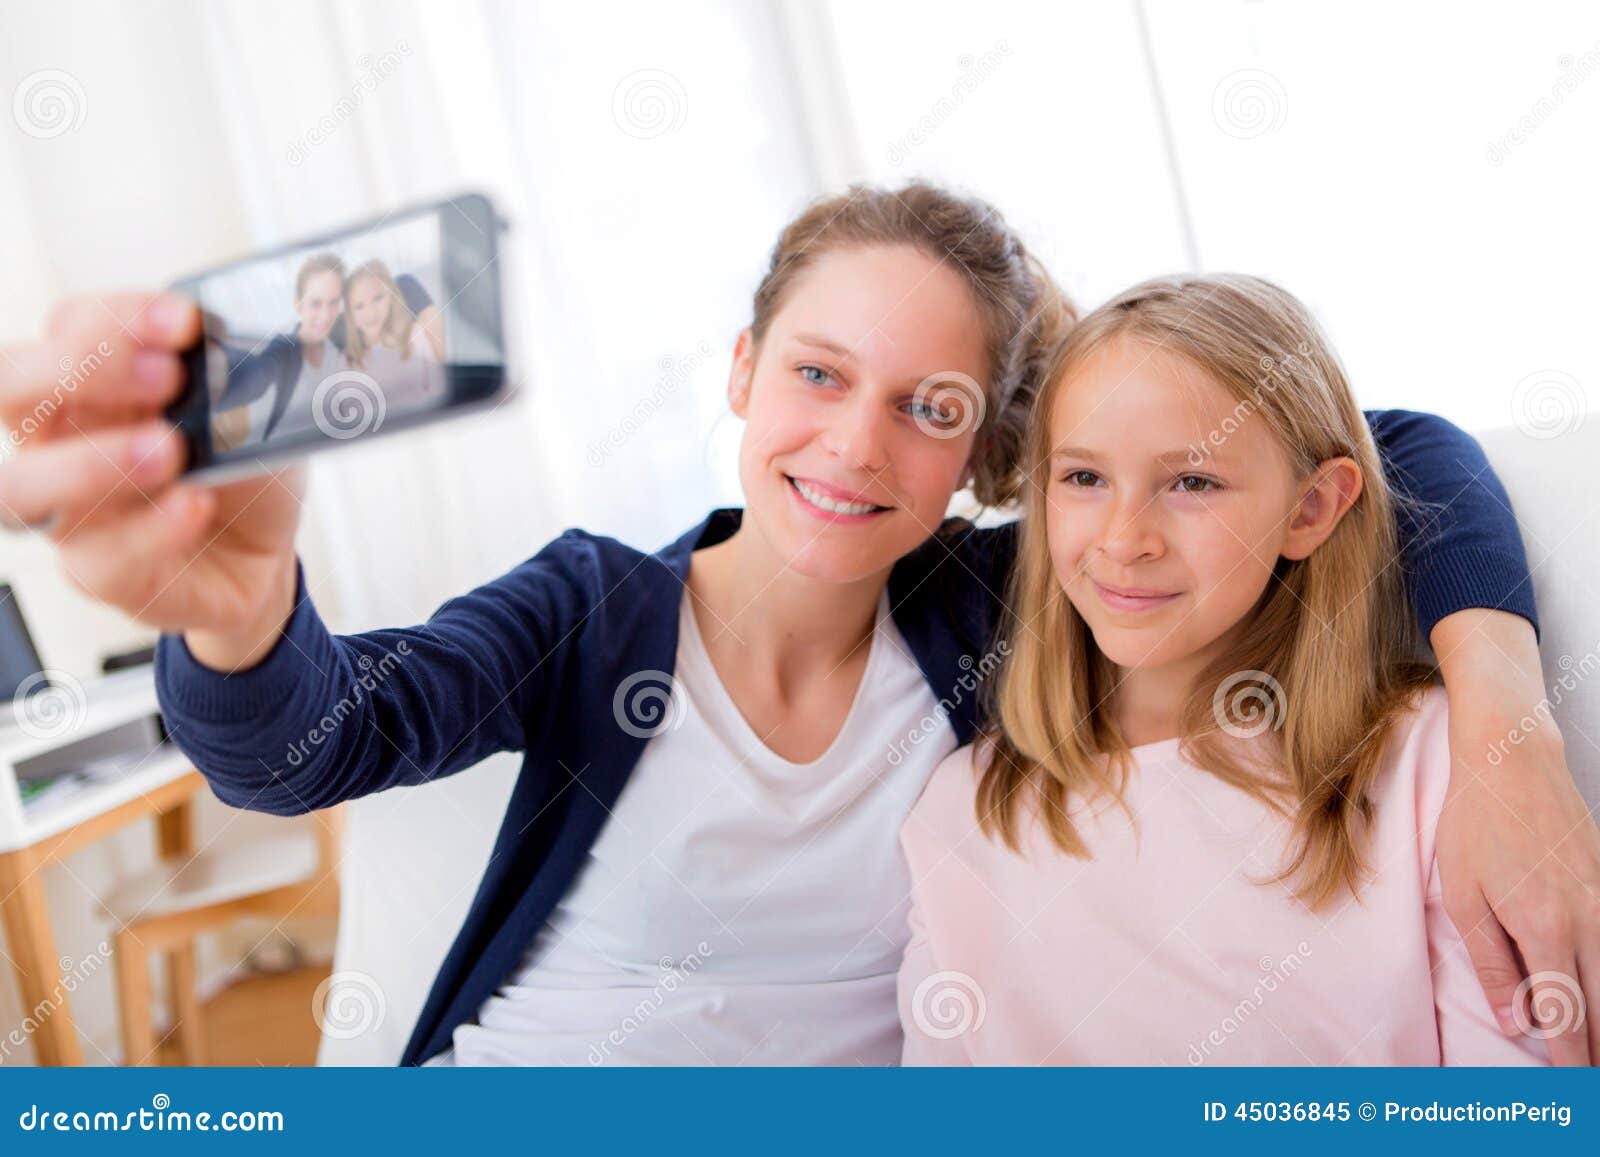 Attractive Woman and Little Sister Taking Selfie Stock Image - Image of ...